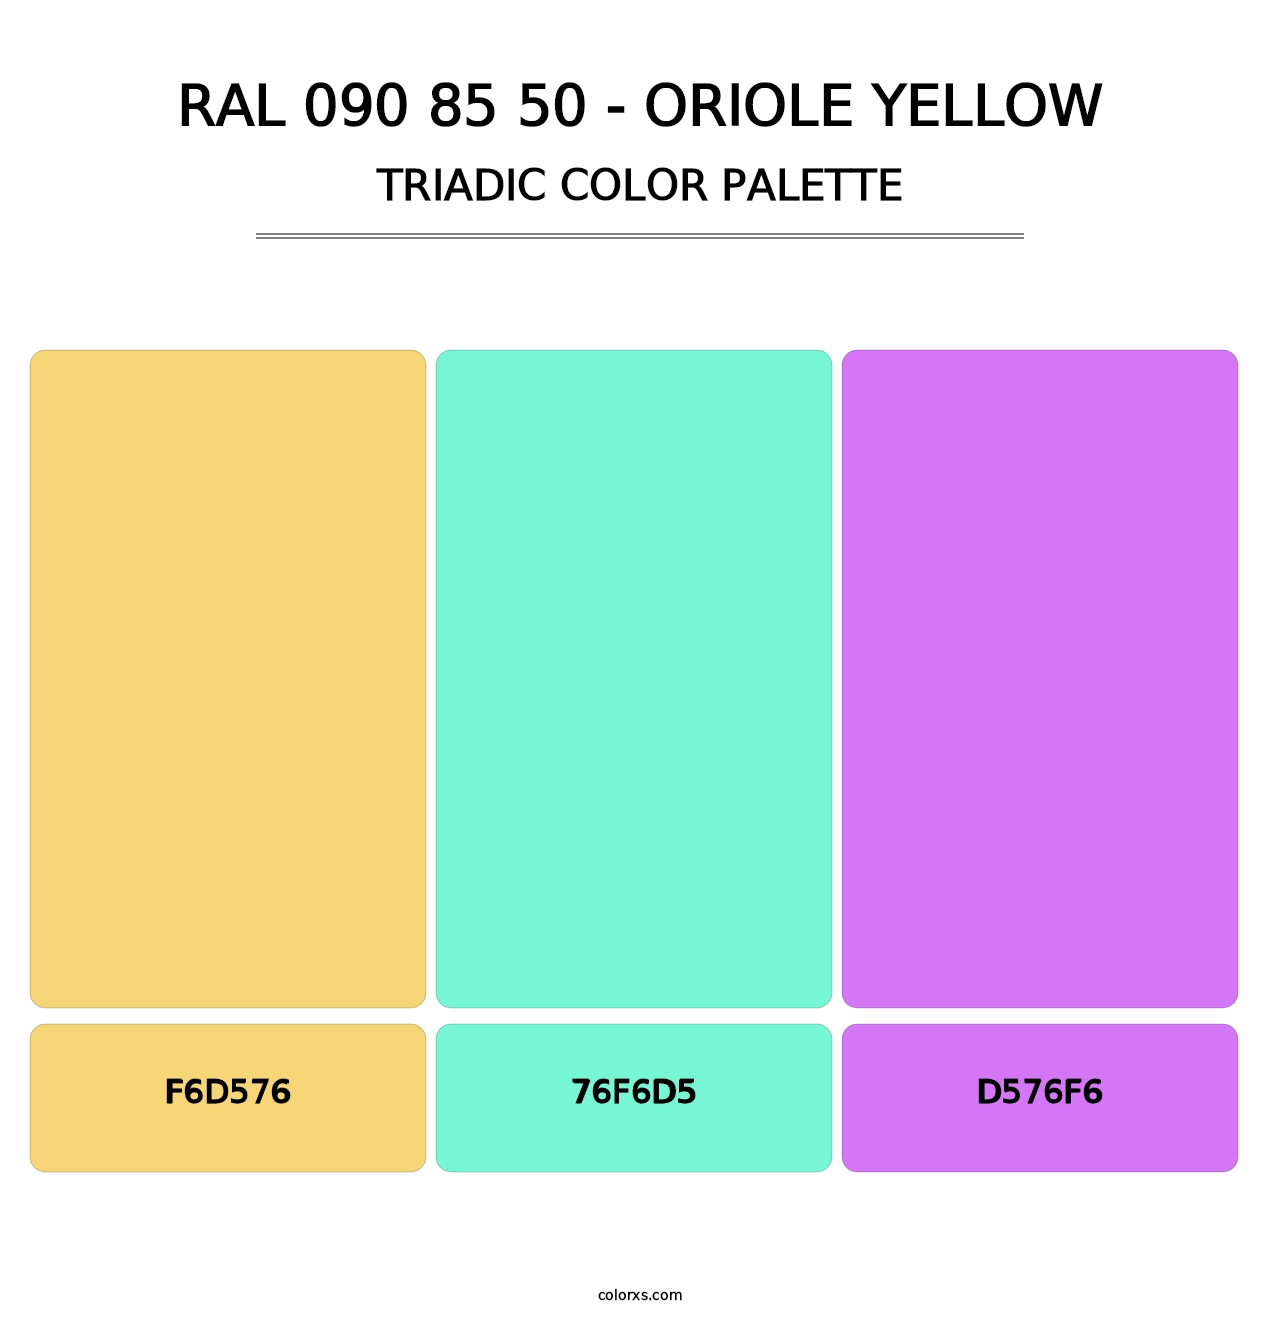 RAL 090 85 50 - Oriole Yellow - Triadic Color Palette